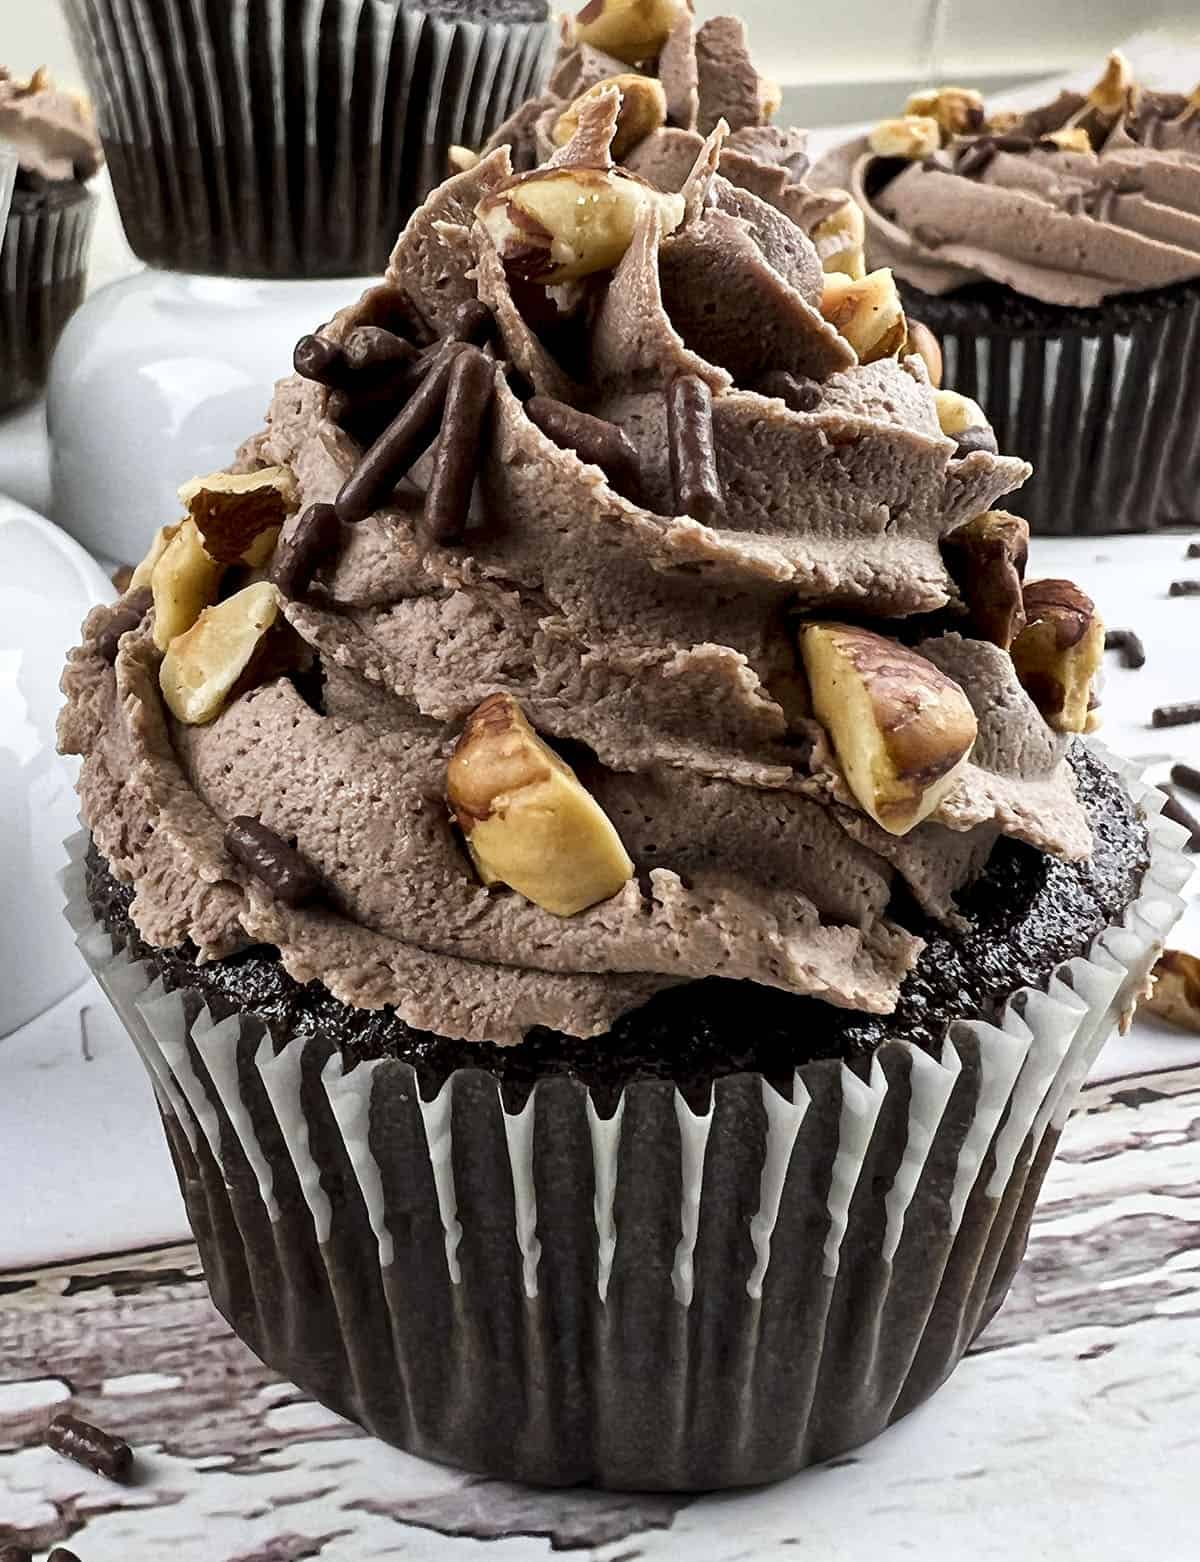 A close up photo of the cupcake with chocolate frosting and nuts.